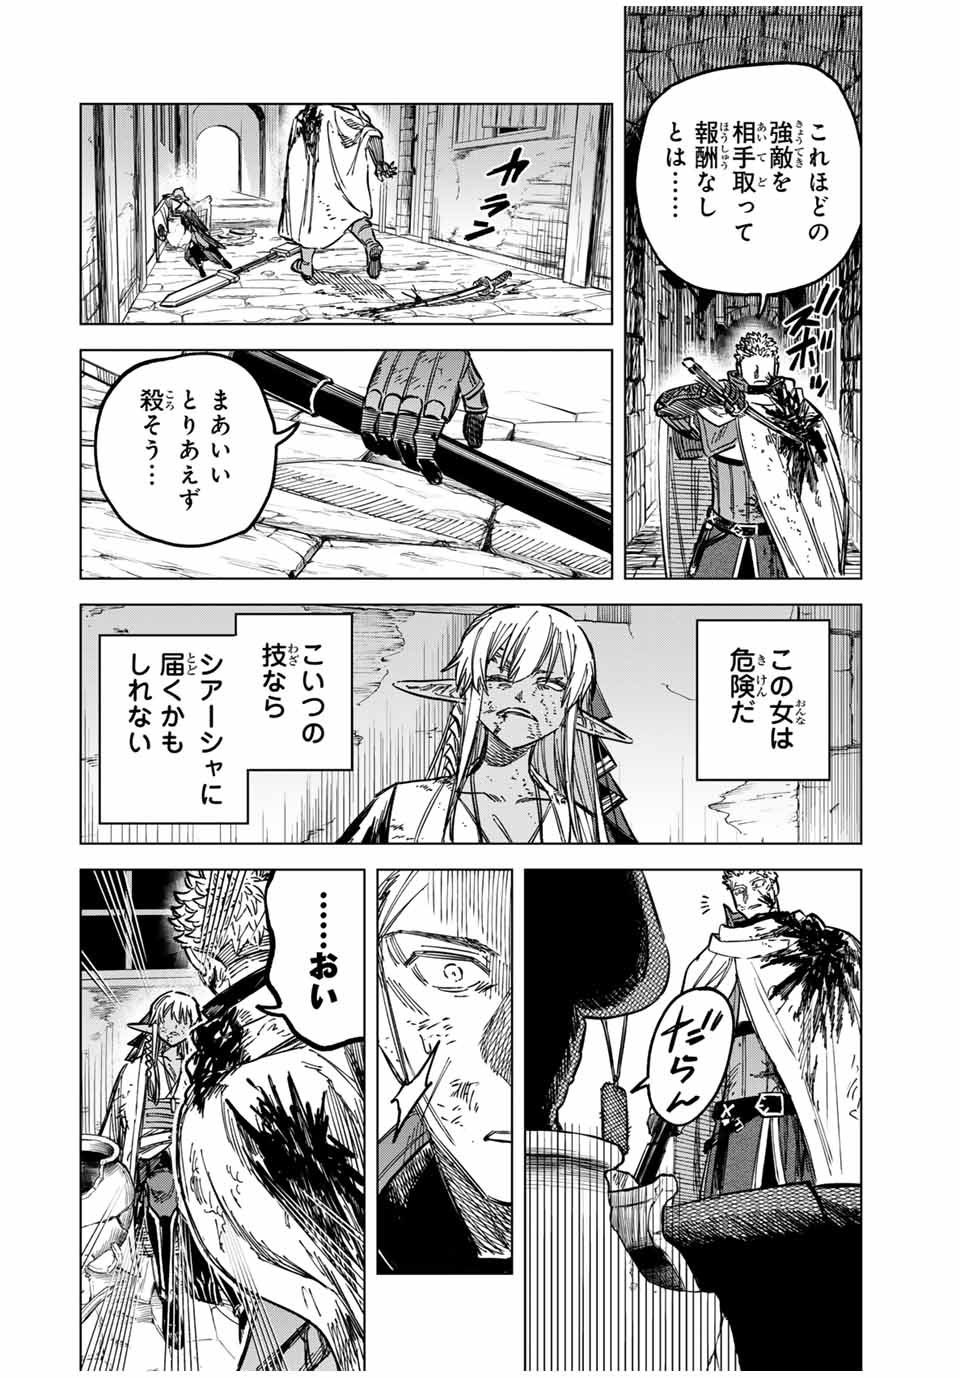 Witch and Mercenary 魔女と傭兵 第13話 - Page 20